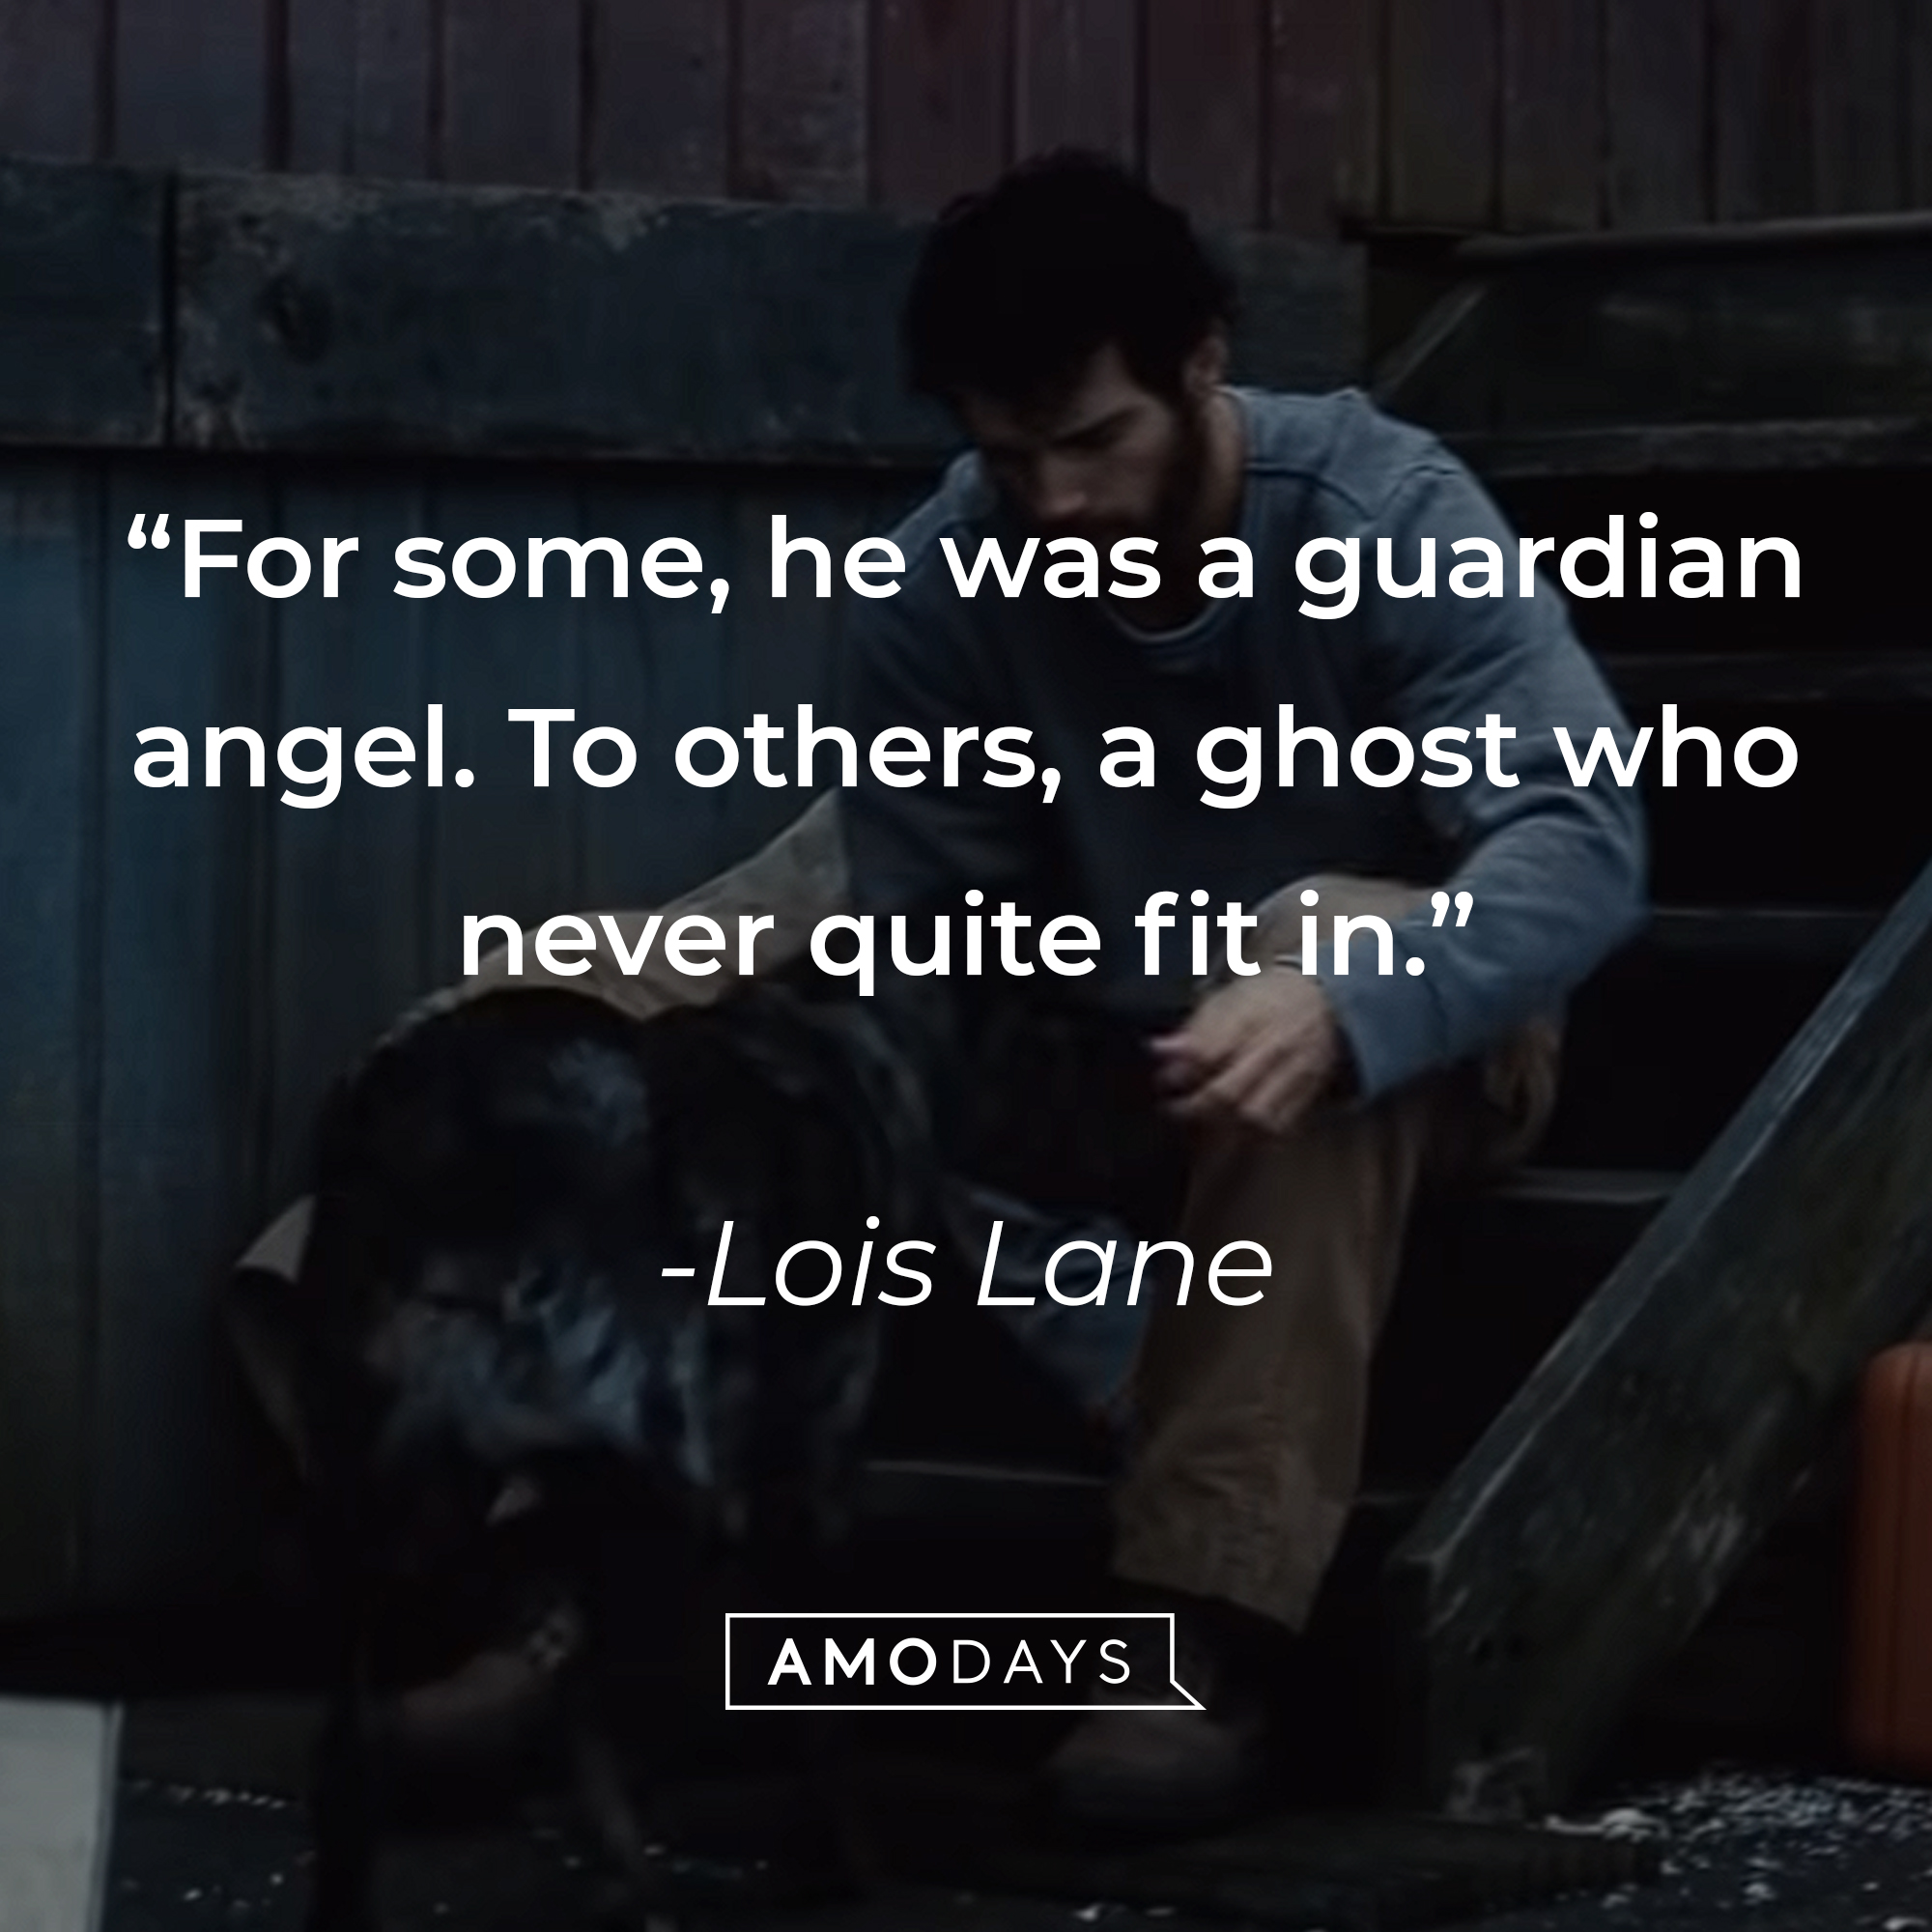 Lois Lane's quote: "For some, he was a guardian angel. To others, a ghost who never quite fit in." | Source: Youtube.com/WarnerBrosPictures